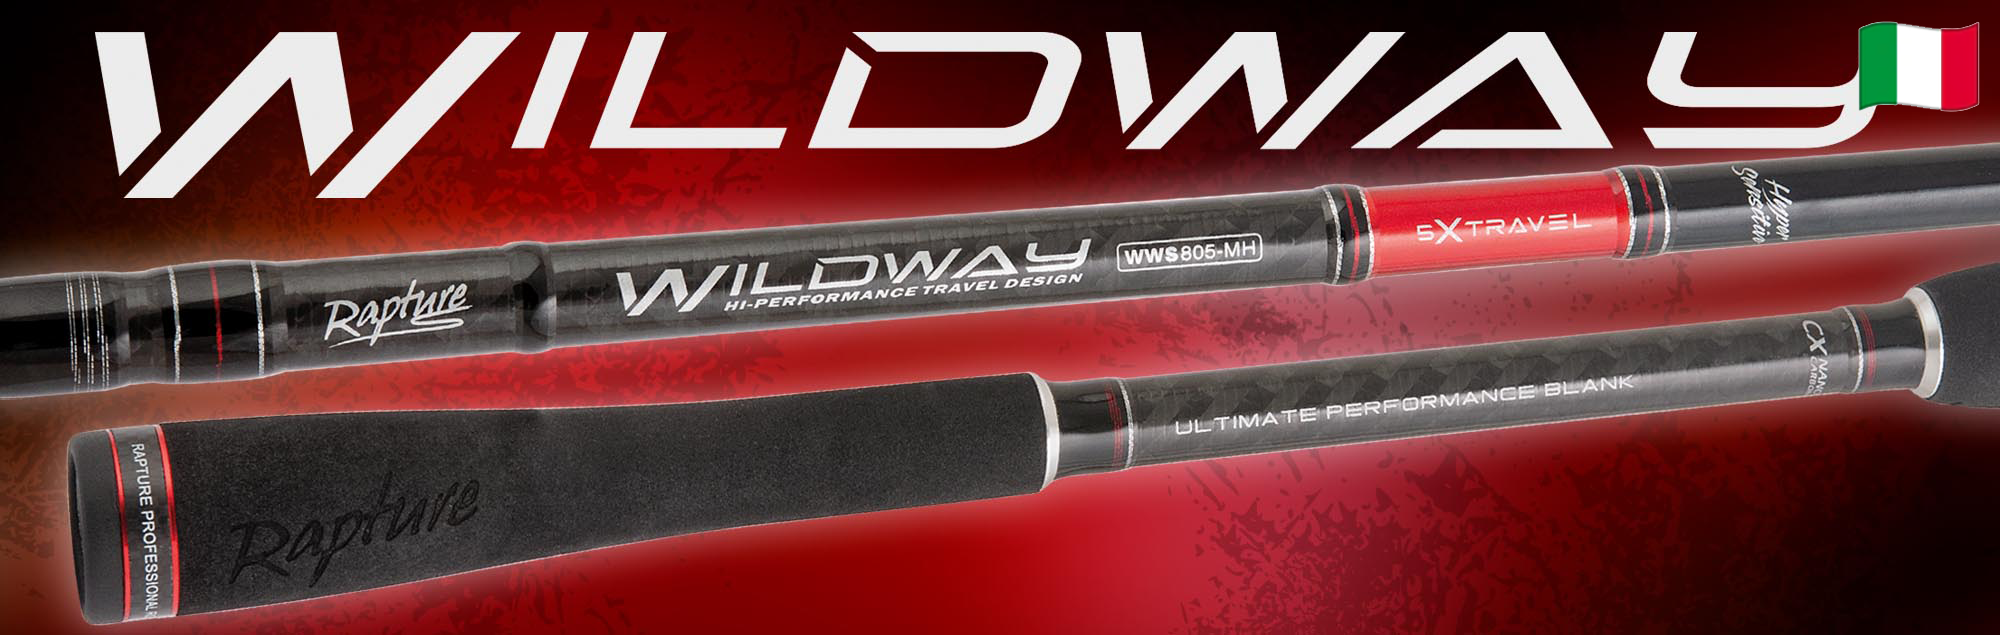 Rapture Wildway High-Performance (10-45 g) Travel Rod - 2.74 m / 9 ft